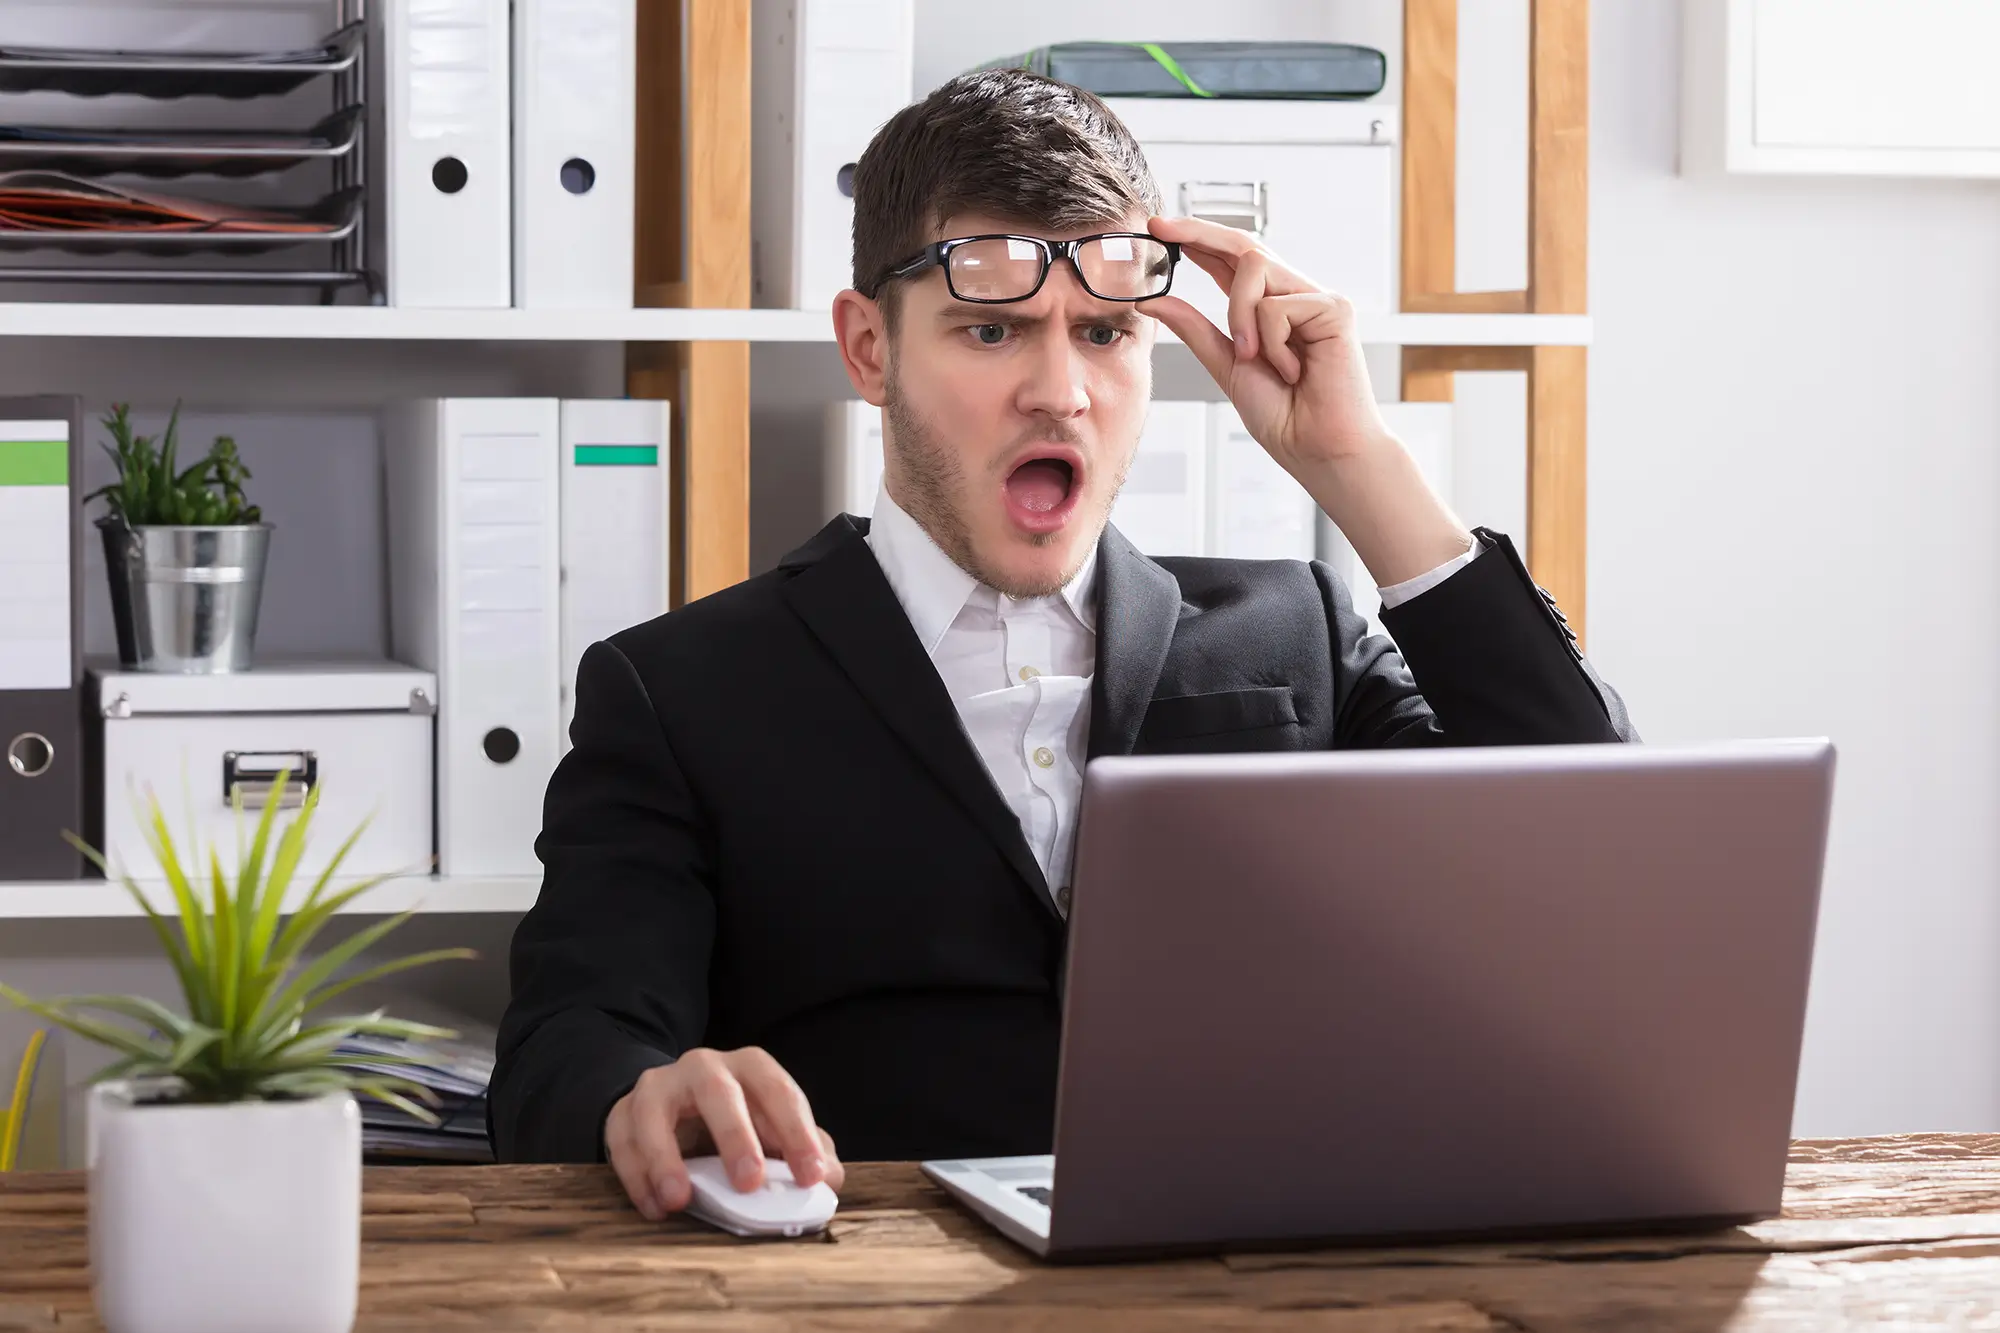 An image of a person who seems shocked looking at their laptop